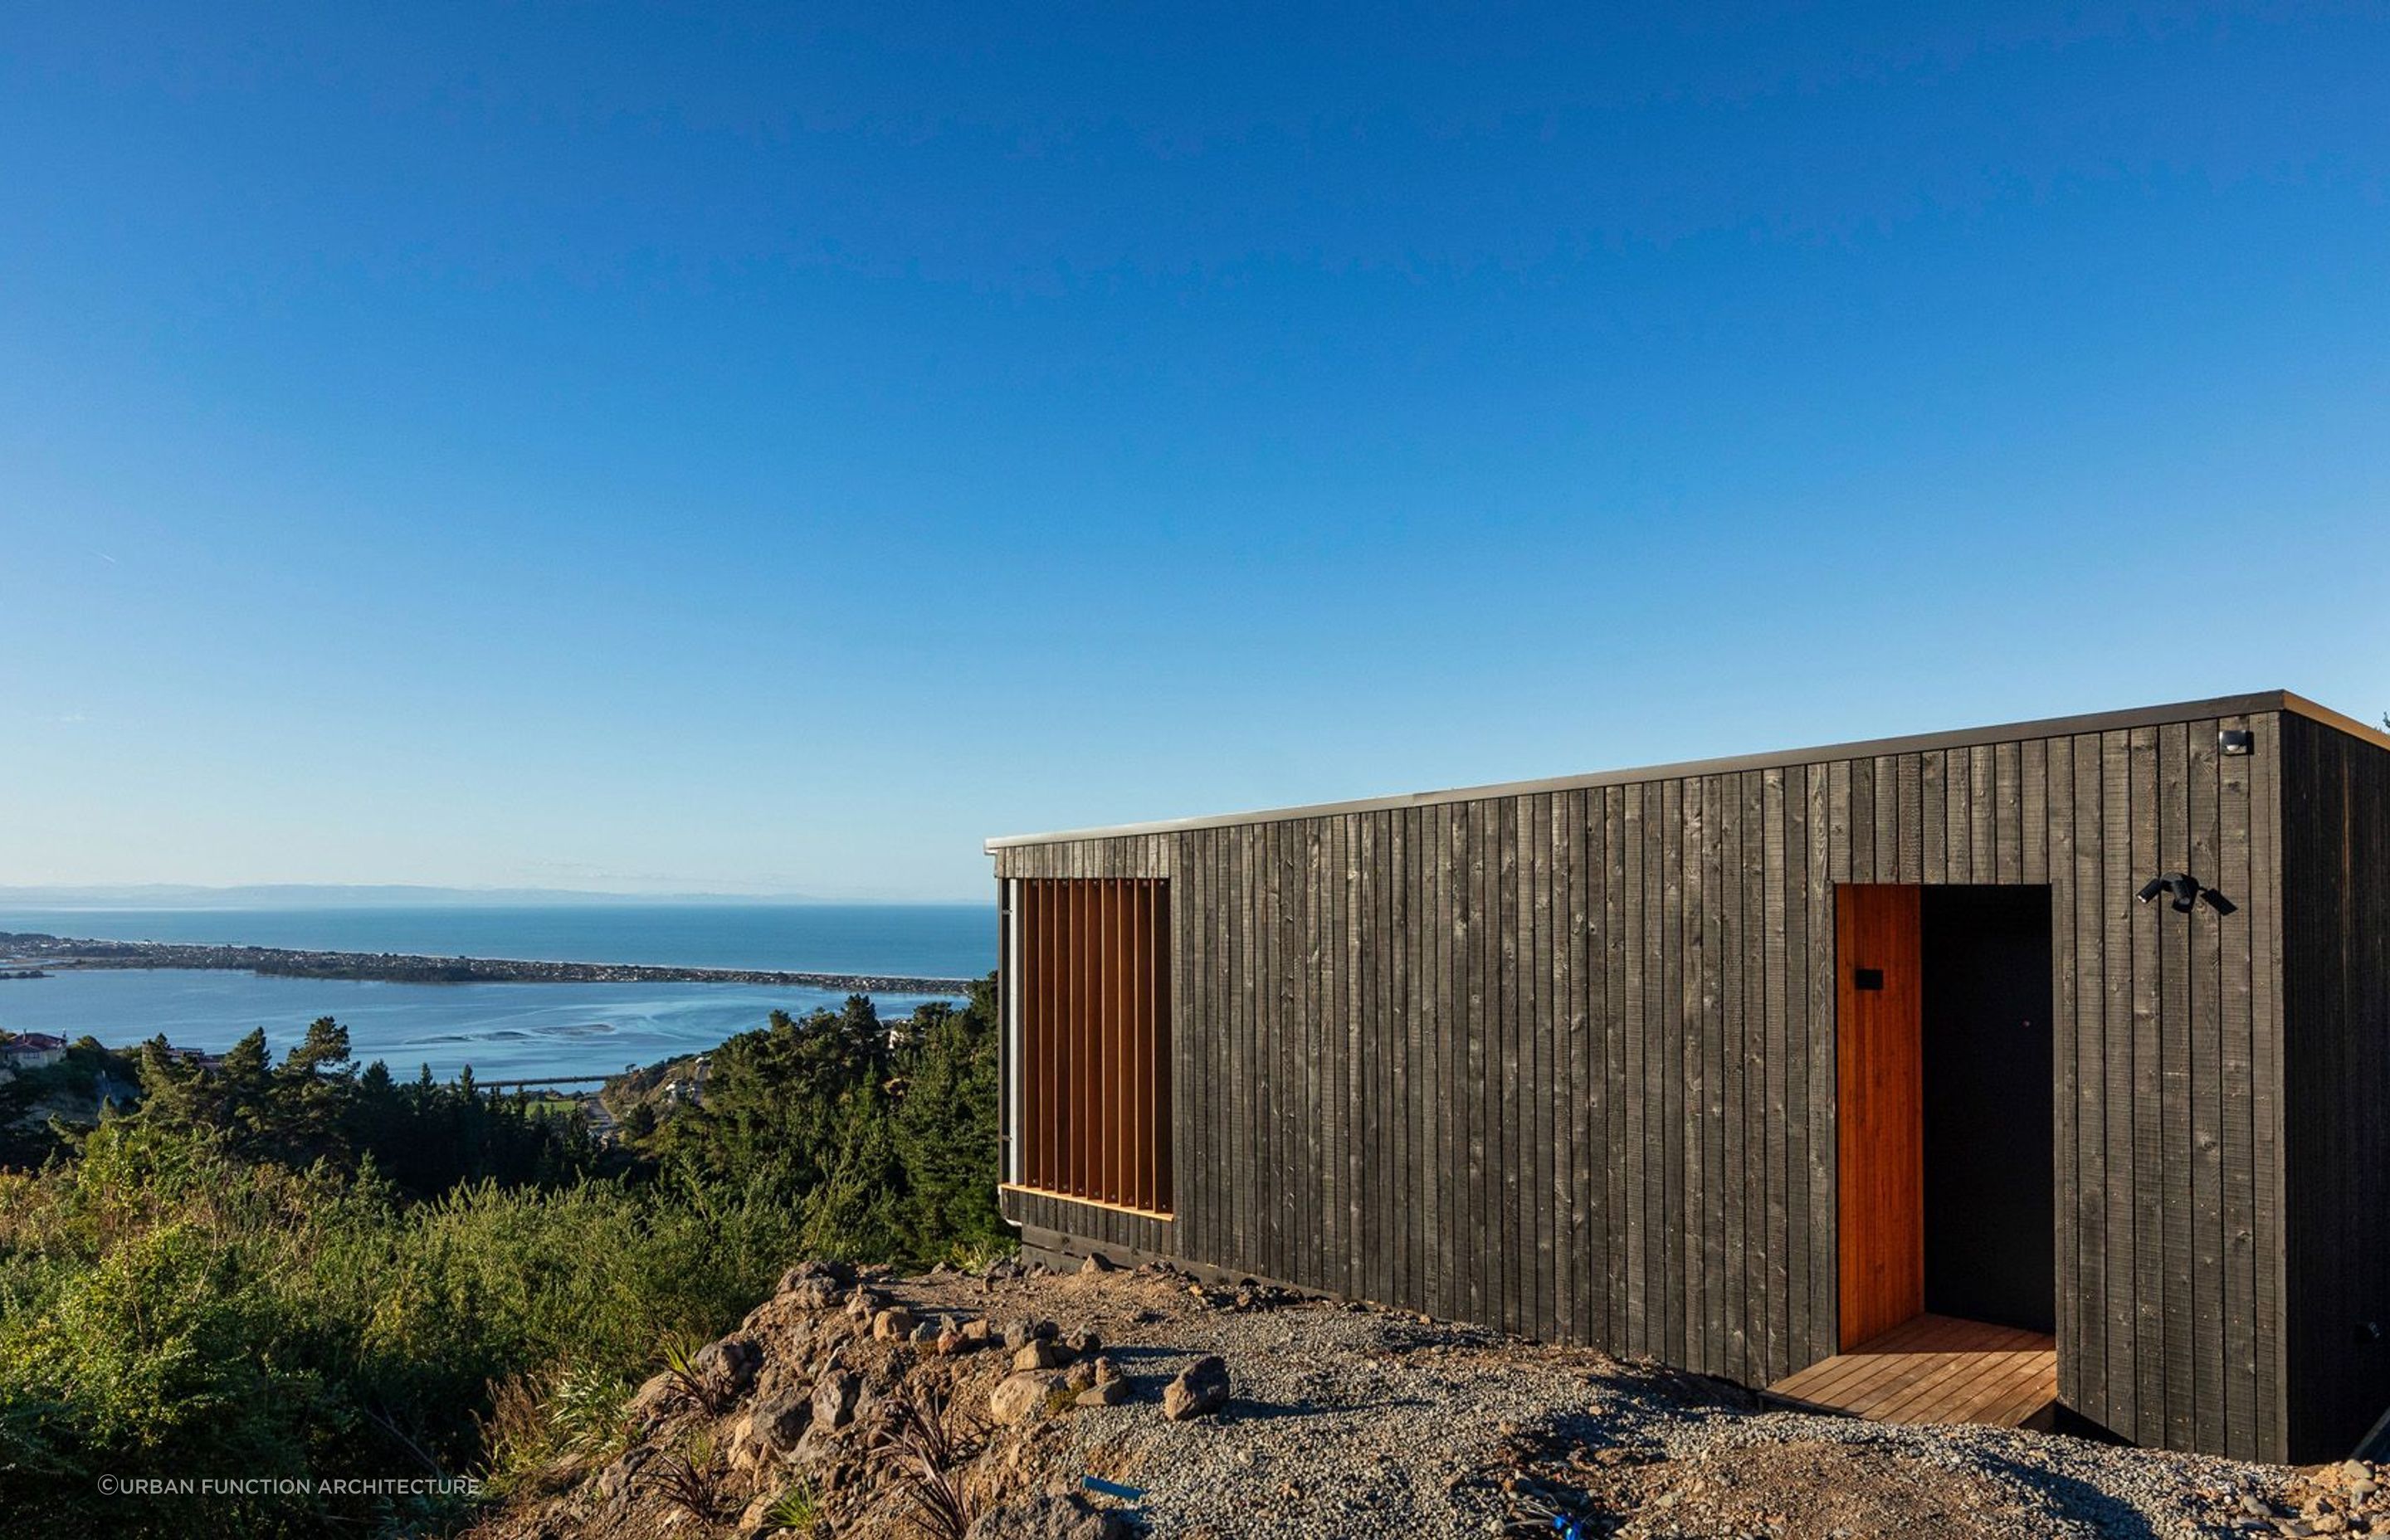 The exterior of the Petite Maison by Urban Function Architecture and its stunning views of the ocean and the Kaikoura ranges